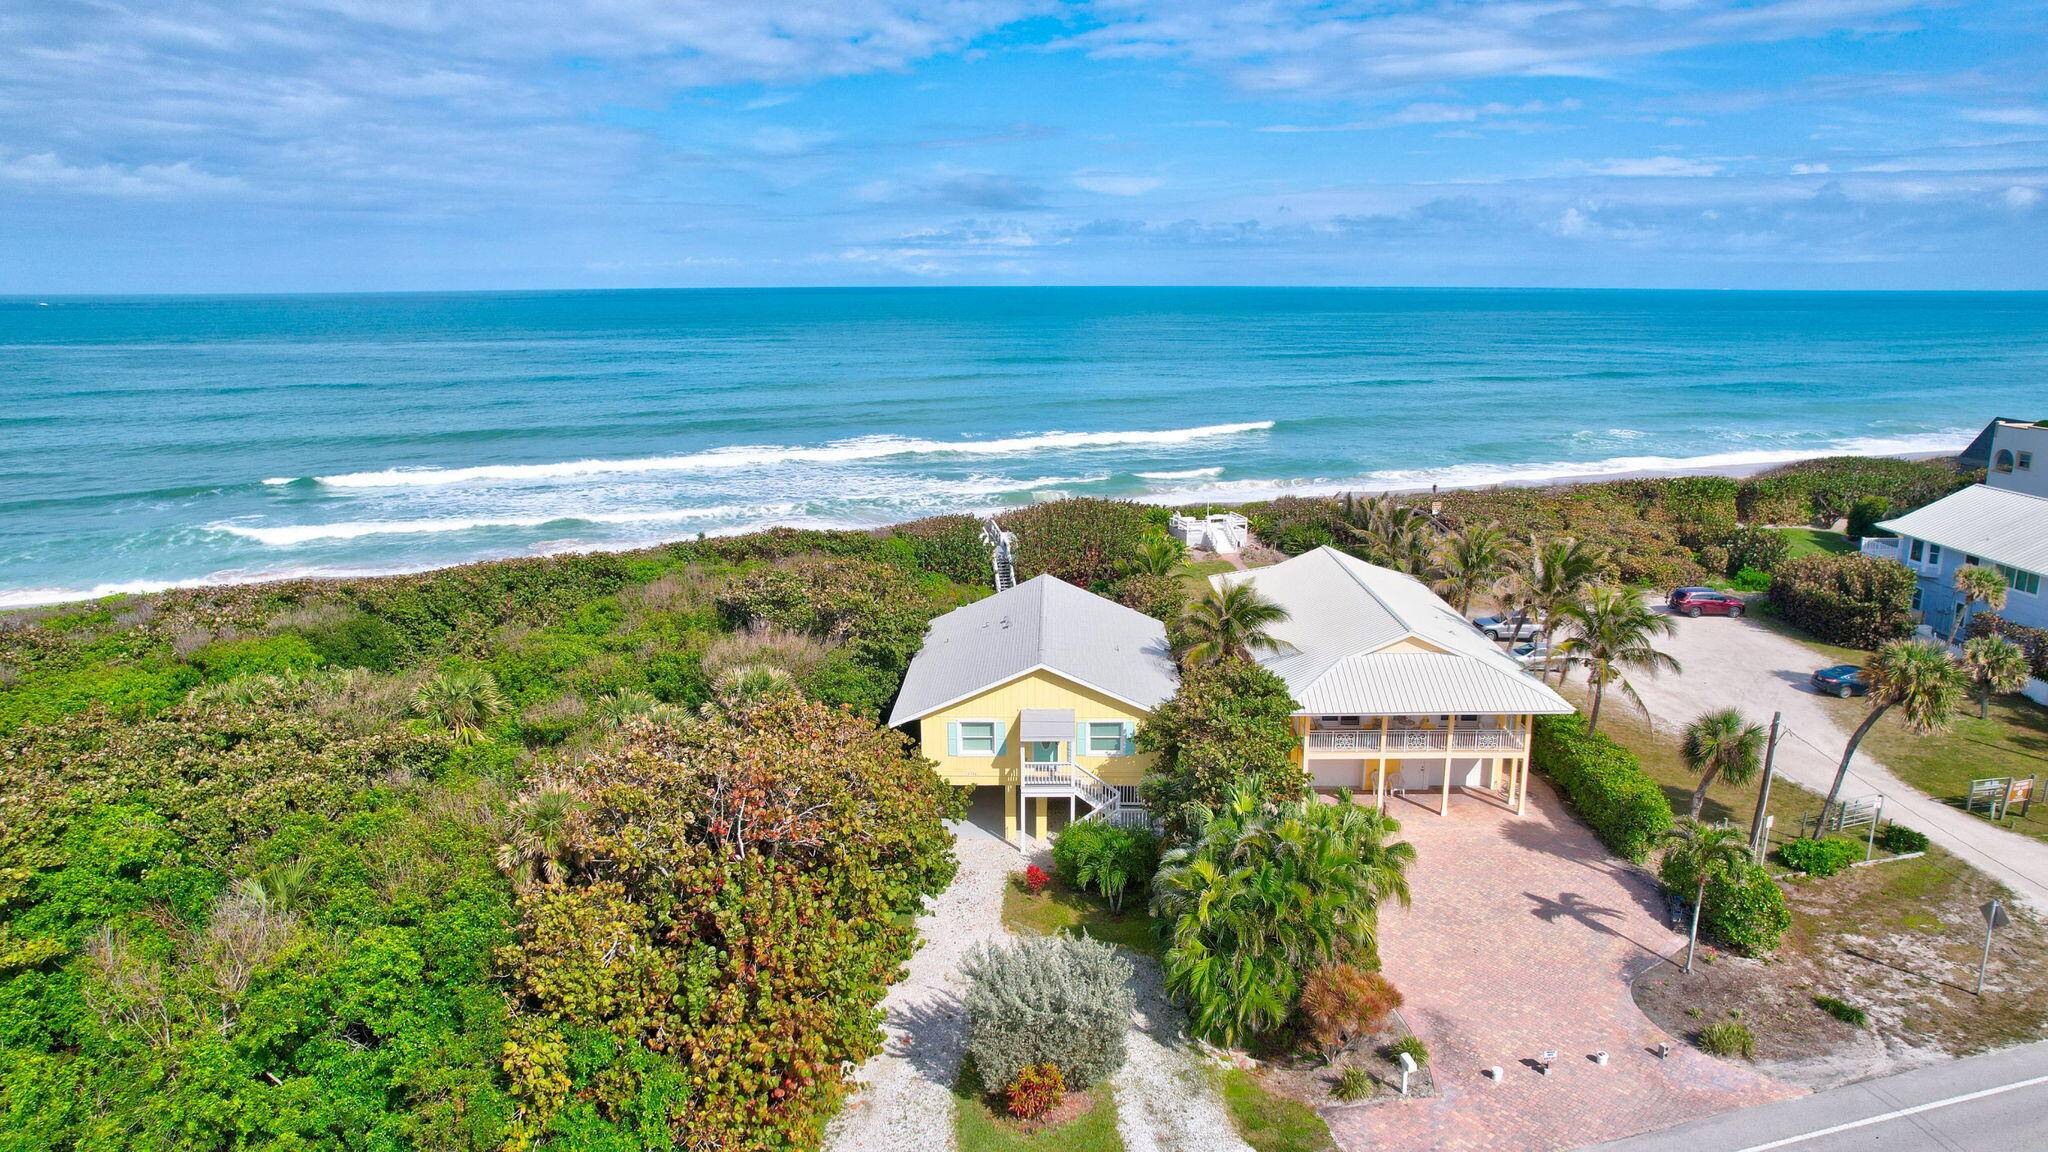 Spectacular oceanfront 3 2 home with 1 car carport situated on the barrier island minutes to Johns Island and the Windsor, close to shopping, dining and the Sebastian Inlet.